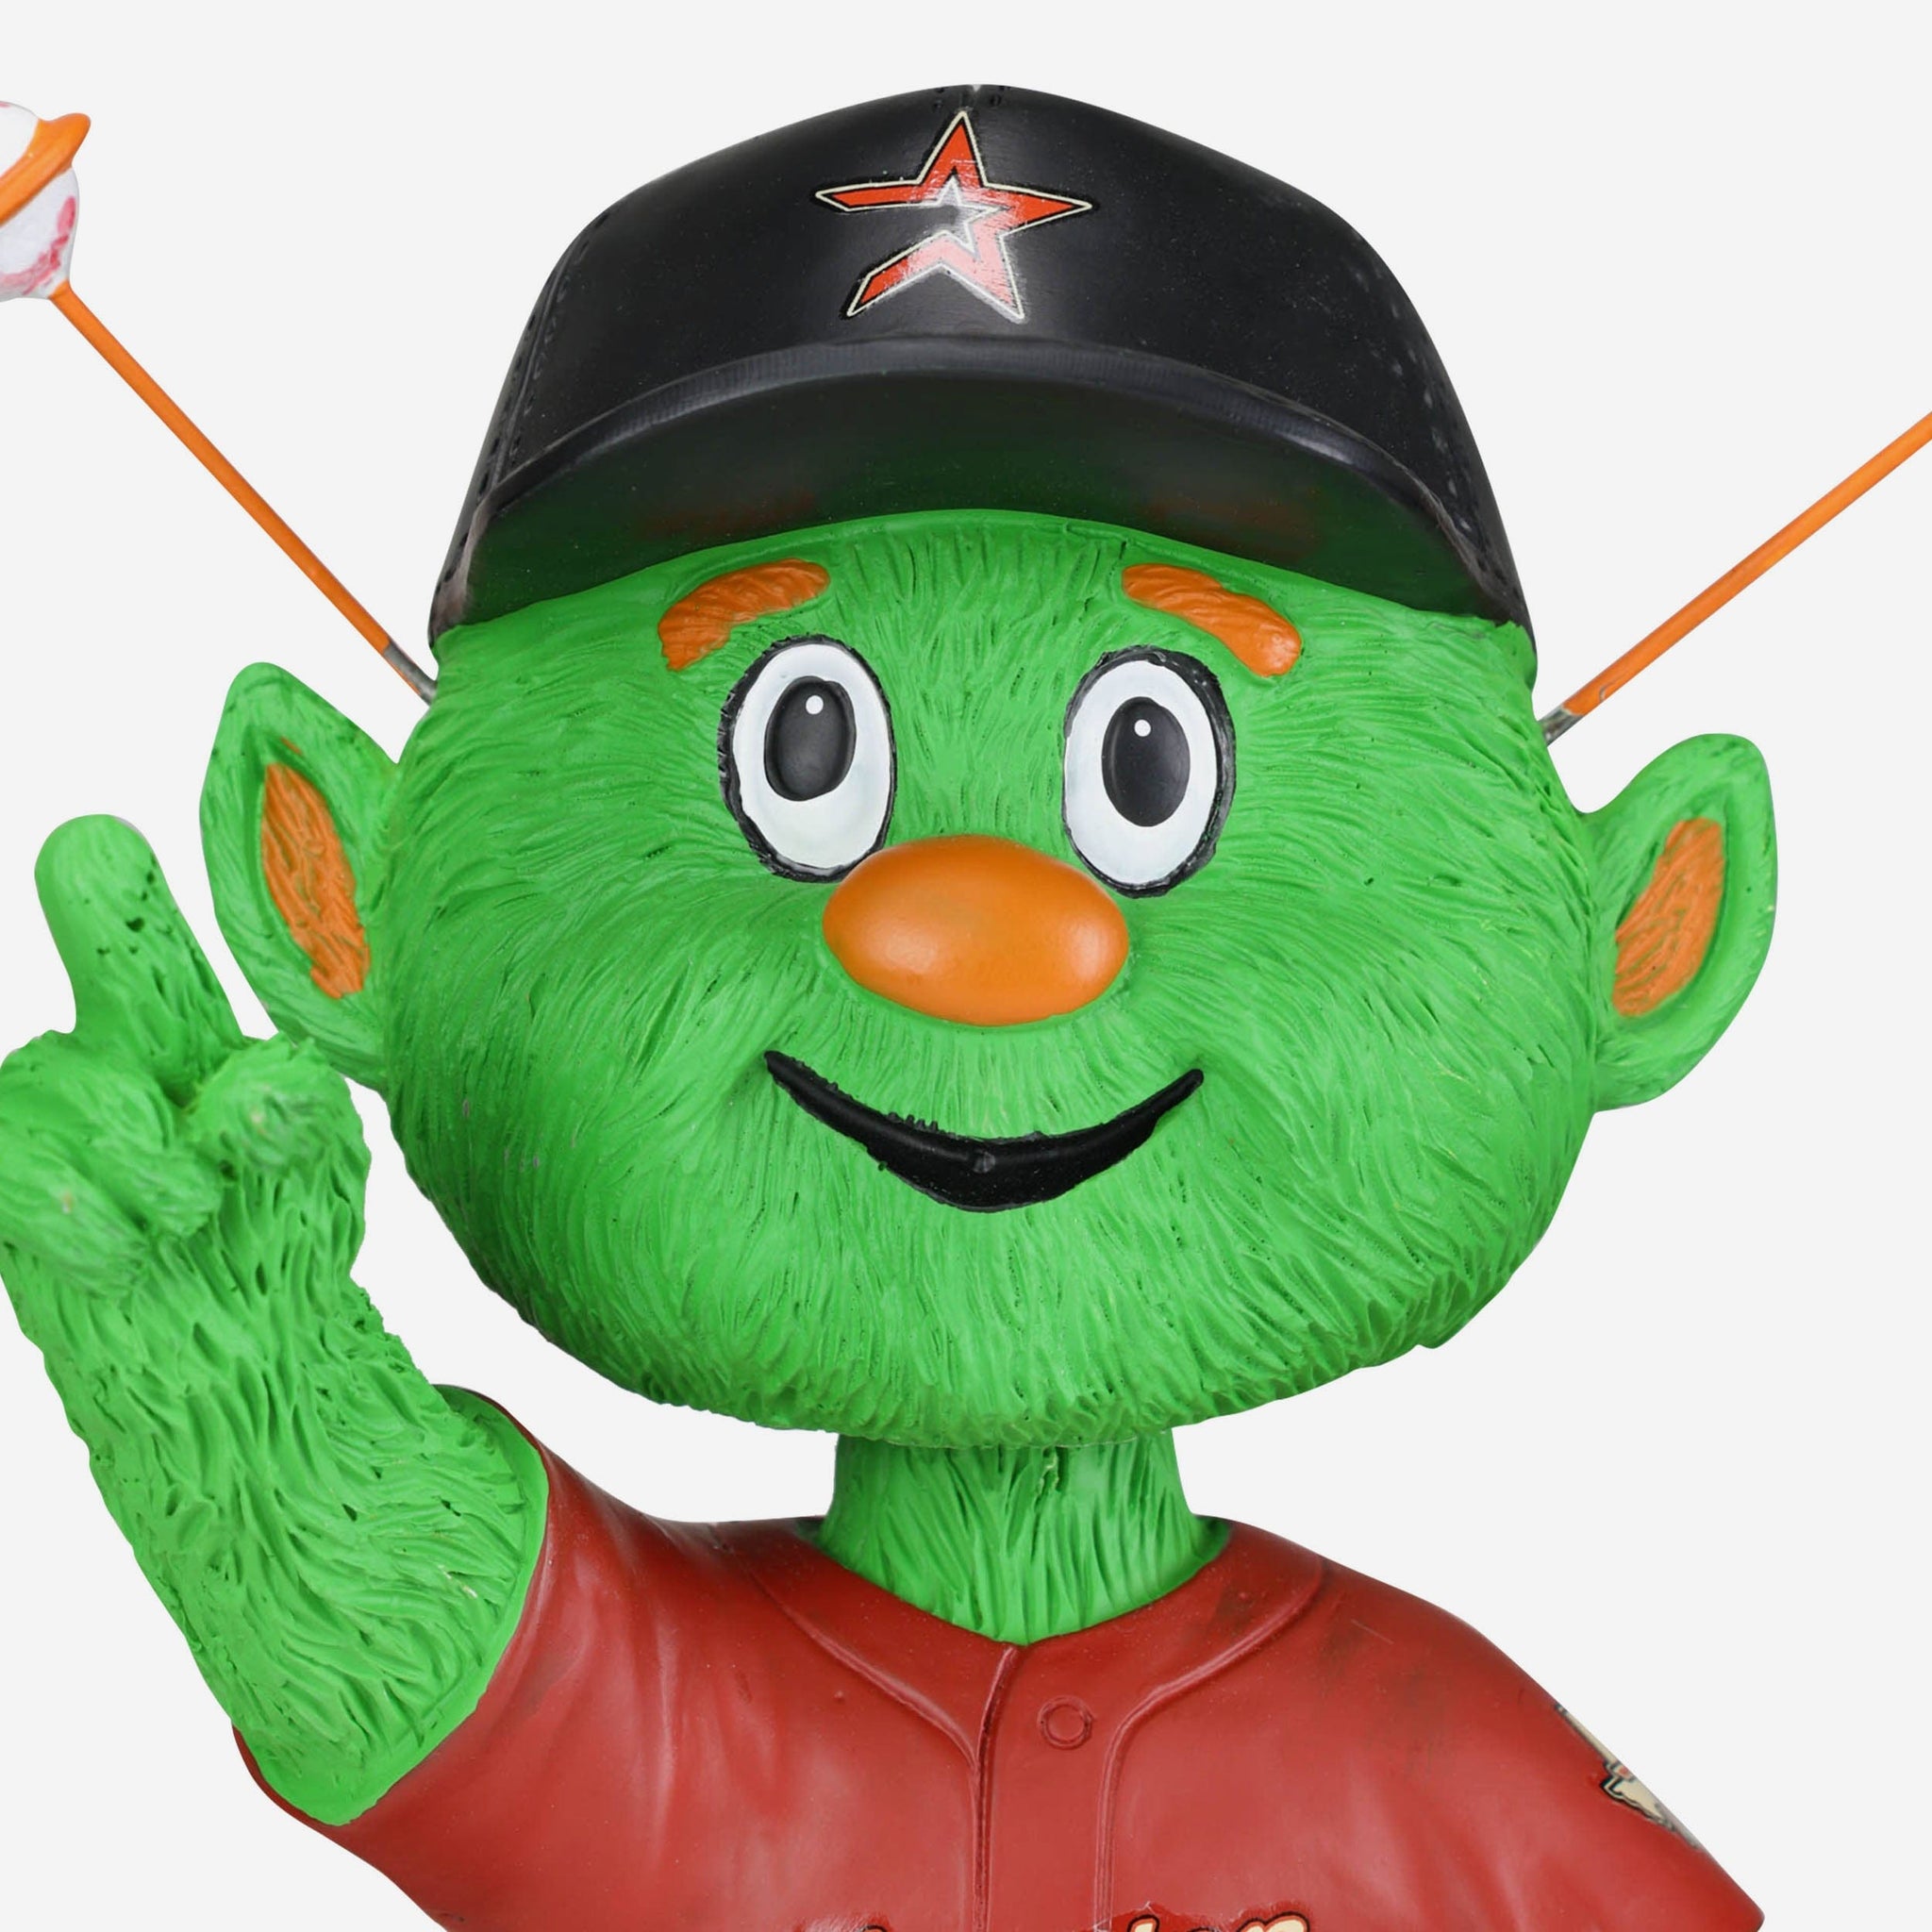 Astros holiday cards: How you can pose with Orbit!